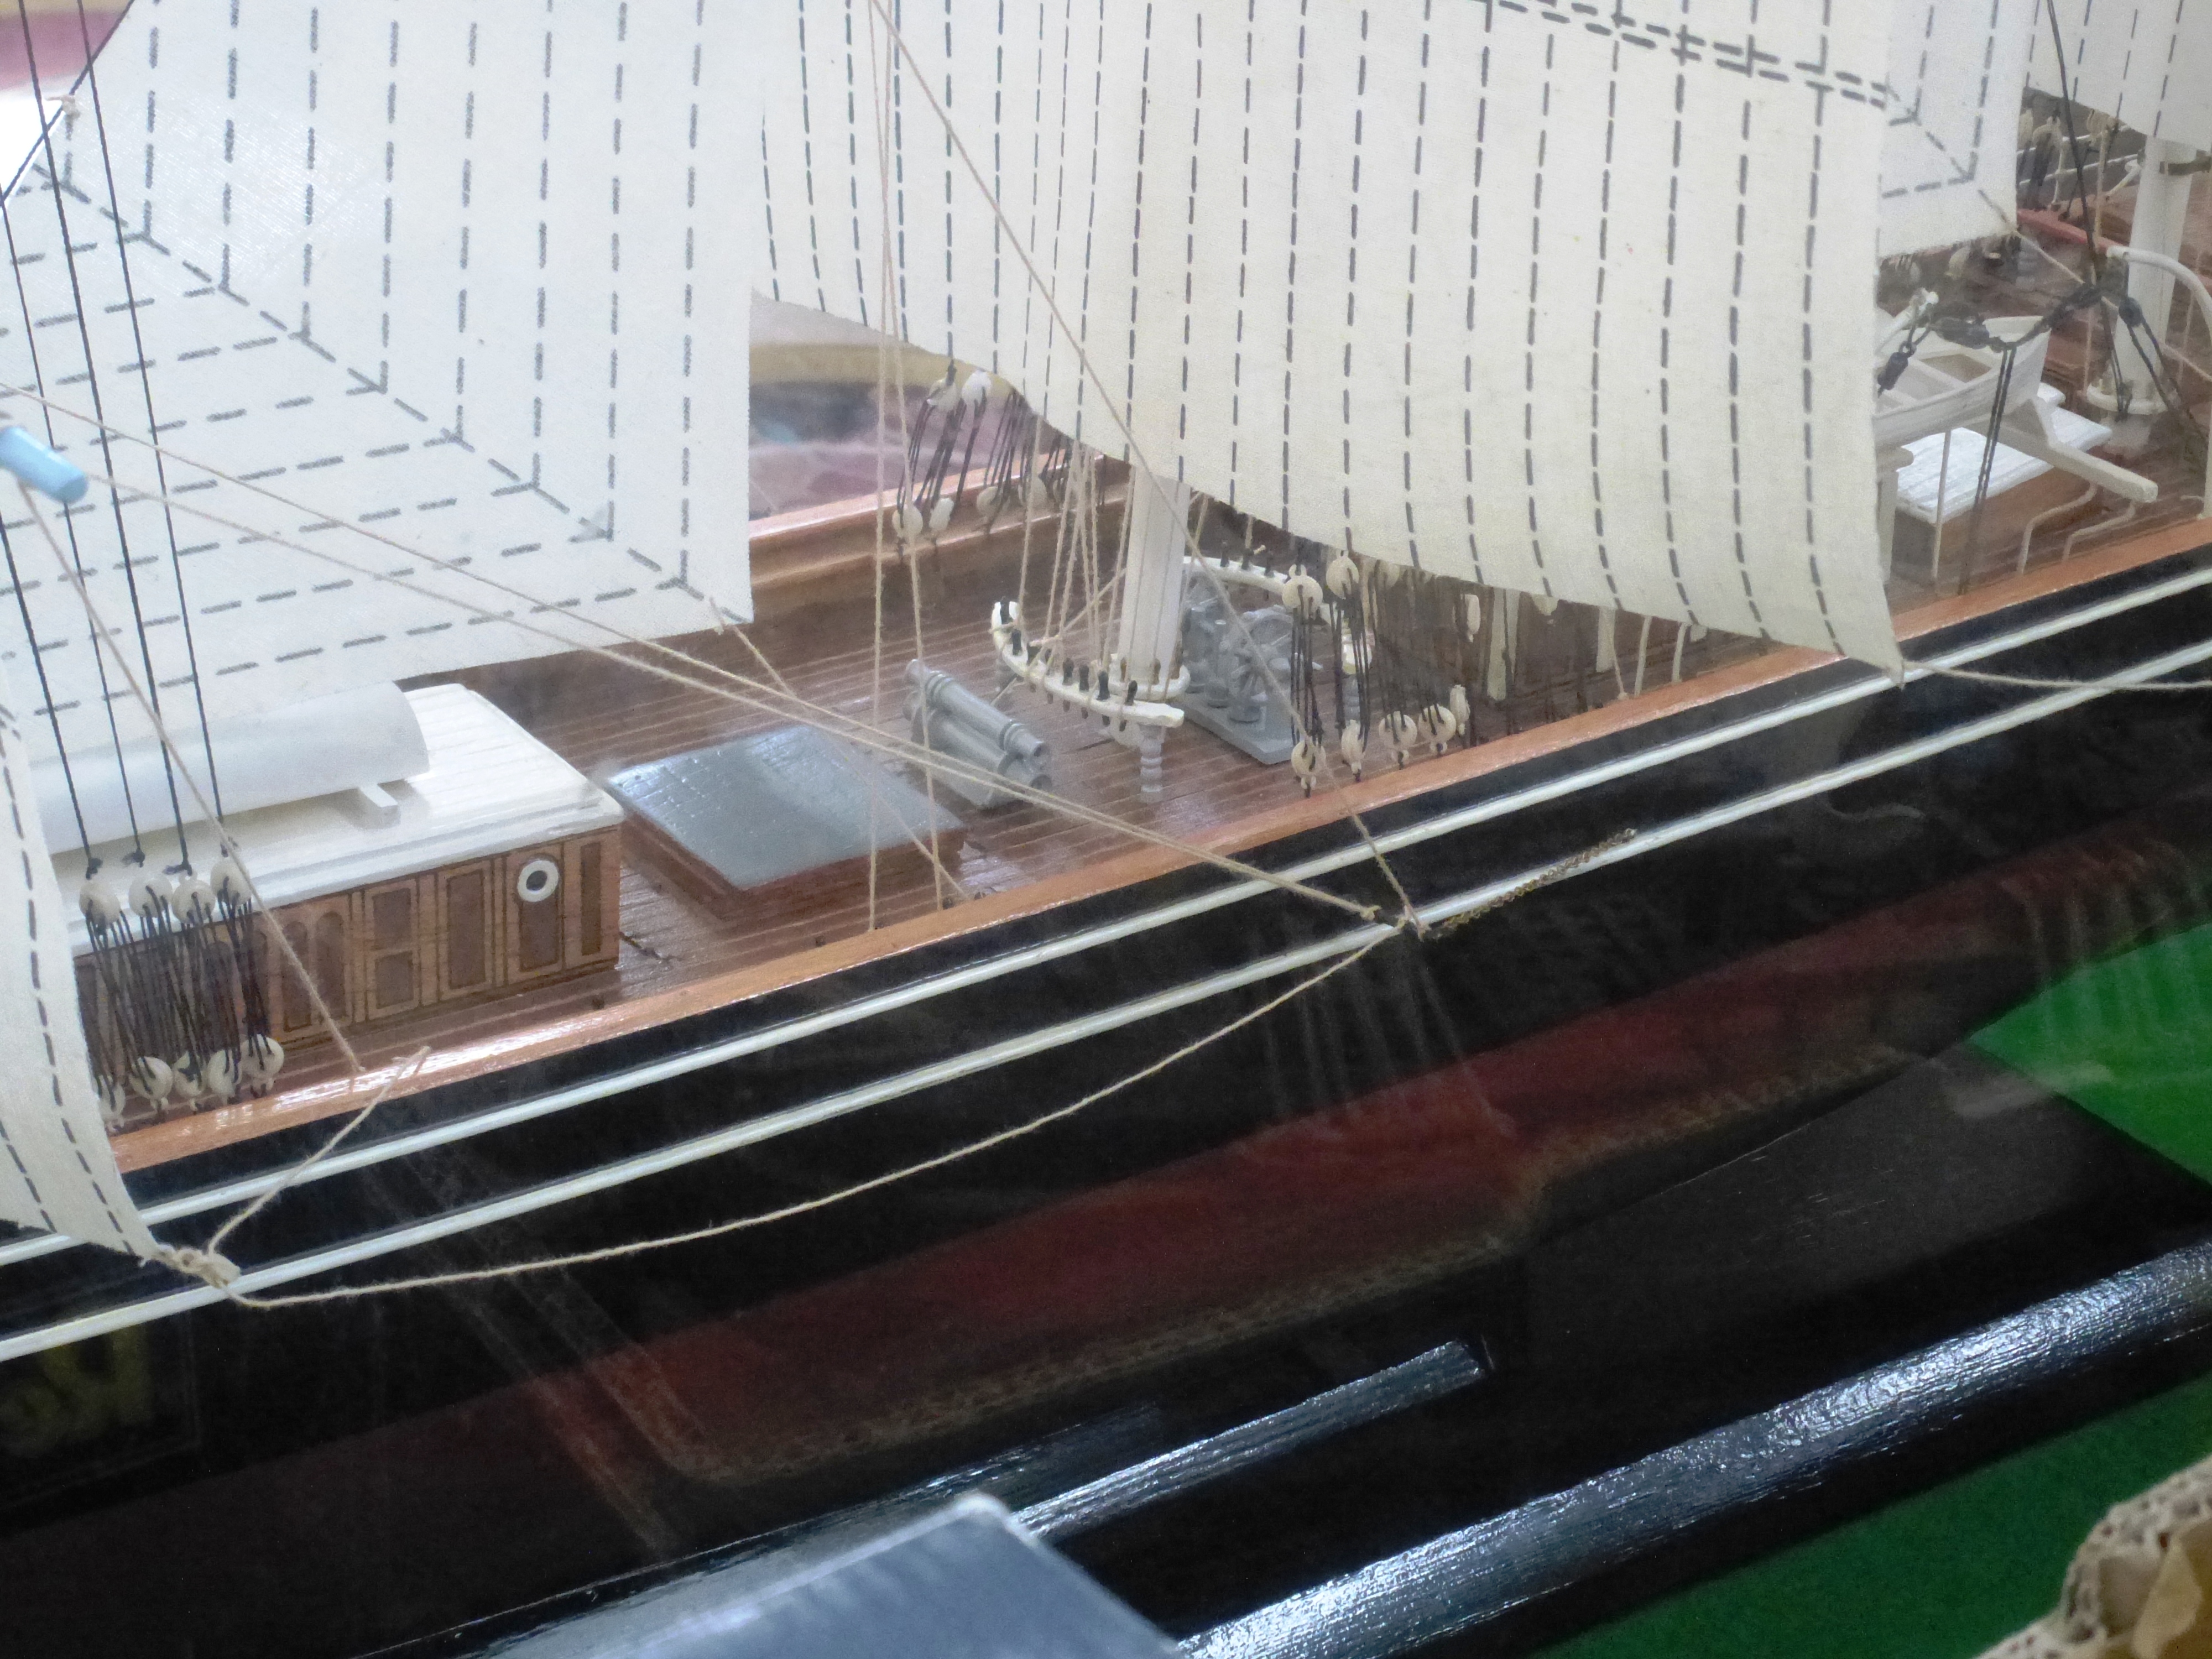 LARGE MODEL CUTTY SARK BOAT IN DISPLAY CASE - Image 3 of 4